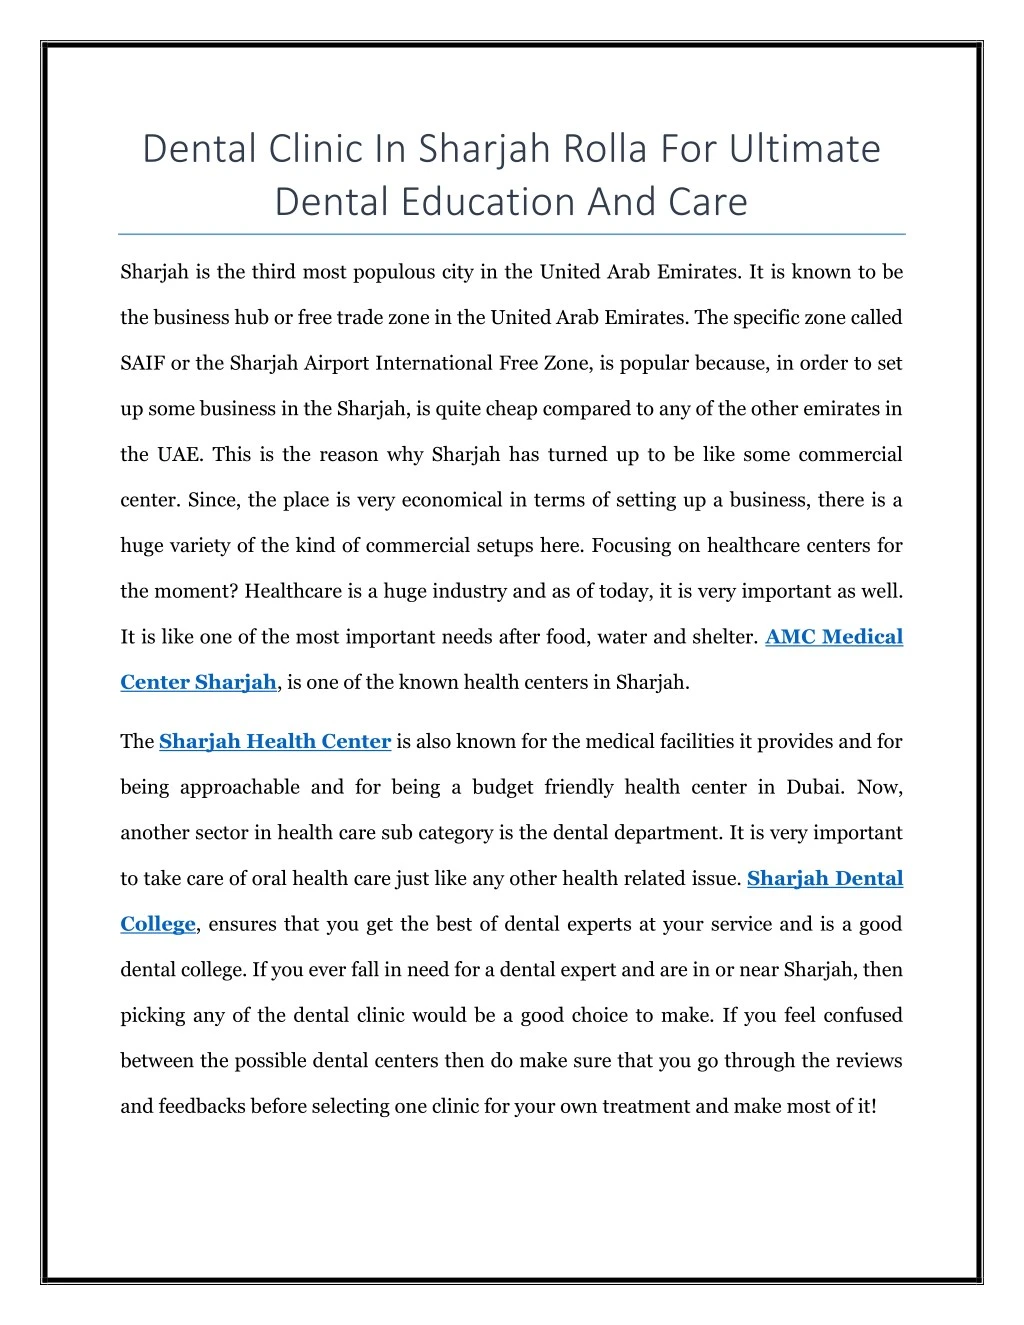 dental clinic in sharjah rolla for ultimate